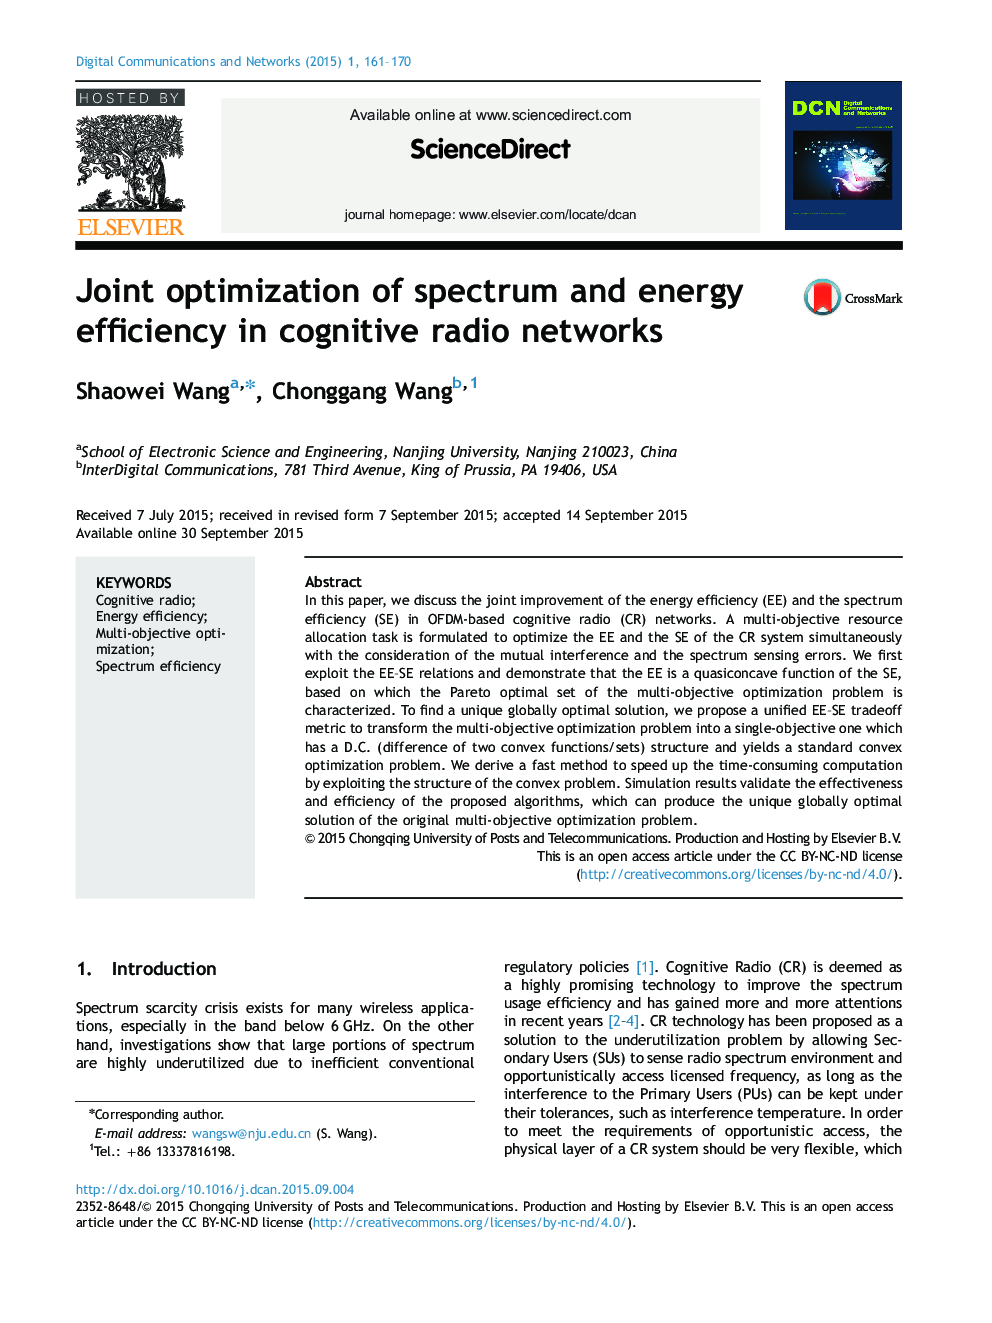 Joint optimization of spectrum and energy efficiency in cognitive radio networks